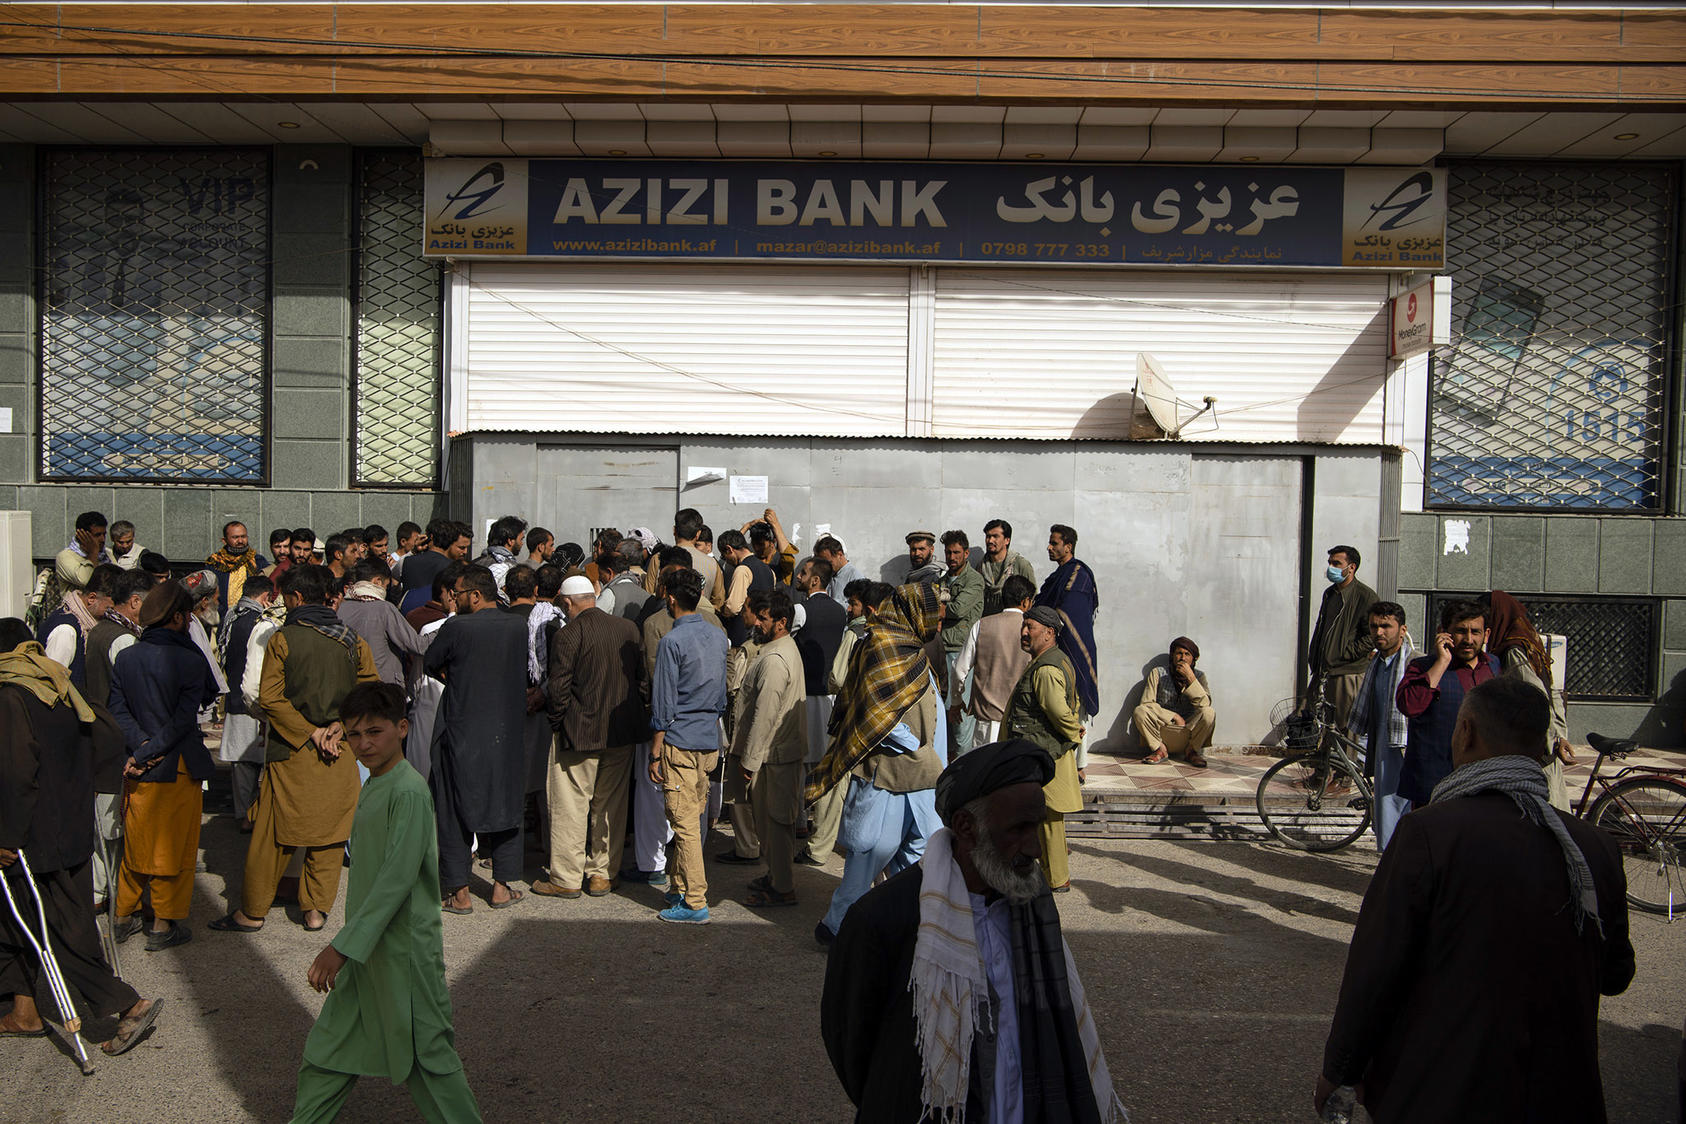 Afghans wait to withdraw money from a bank in Mazar-i-Sharif, Afghanistan, on Oct. 9, 2021. (Kiana Hayeri/The New York Times)